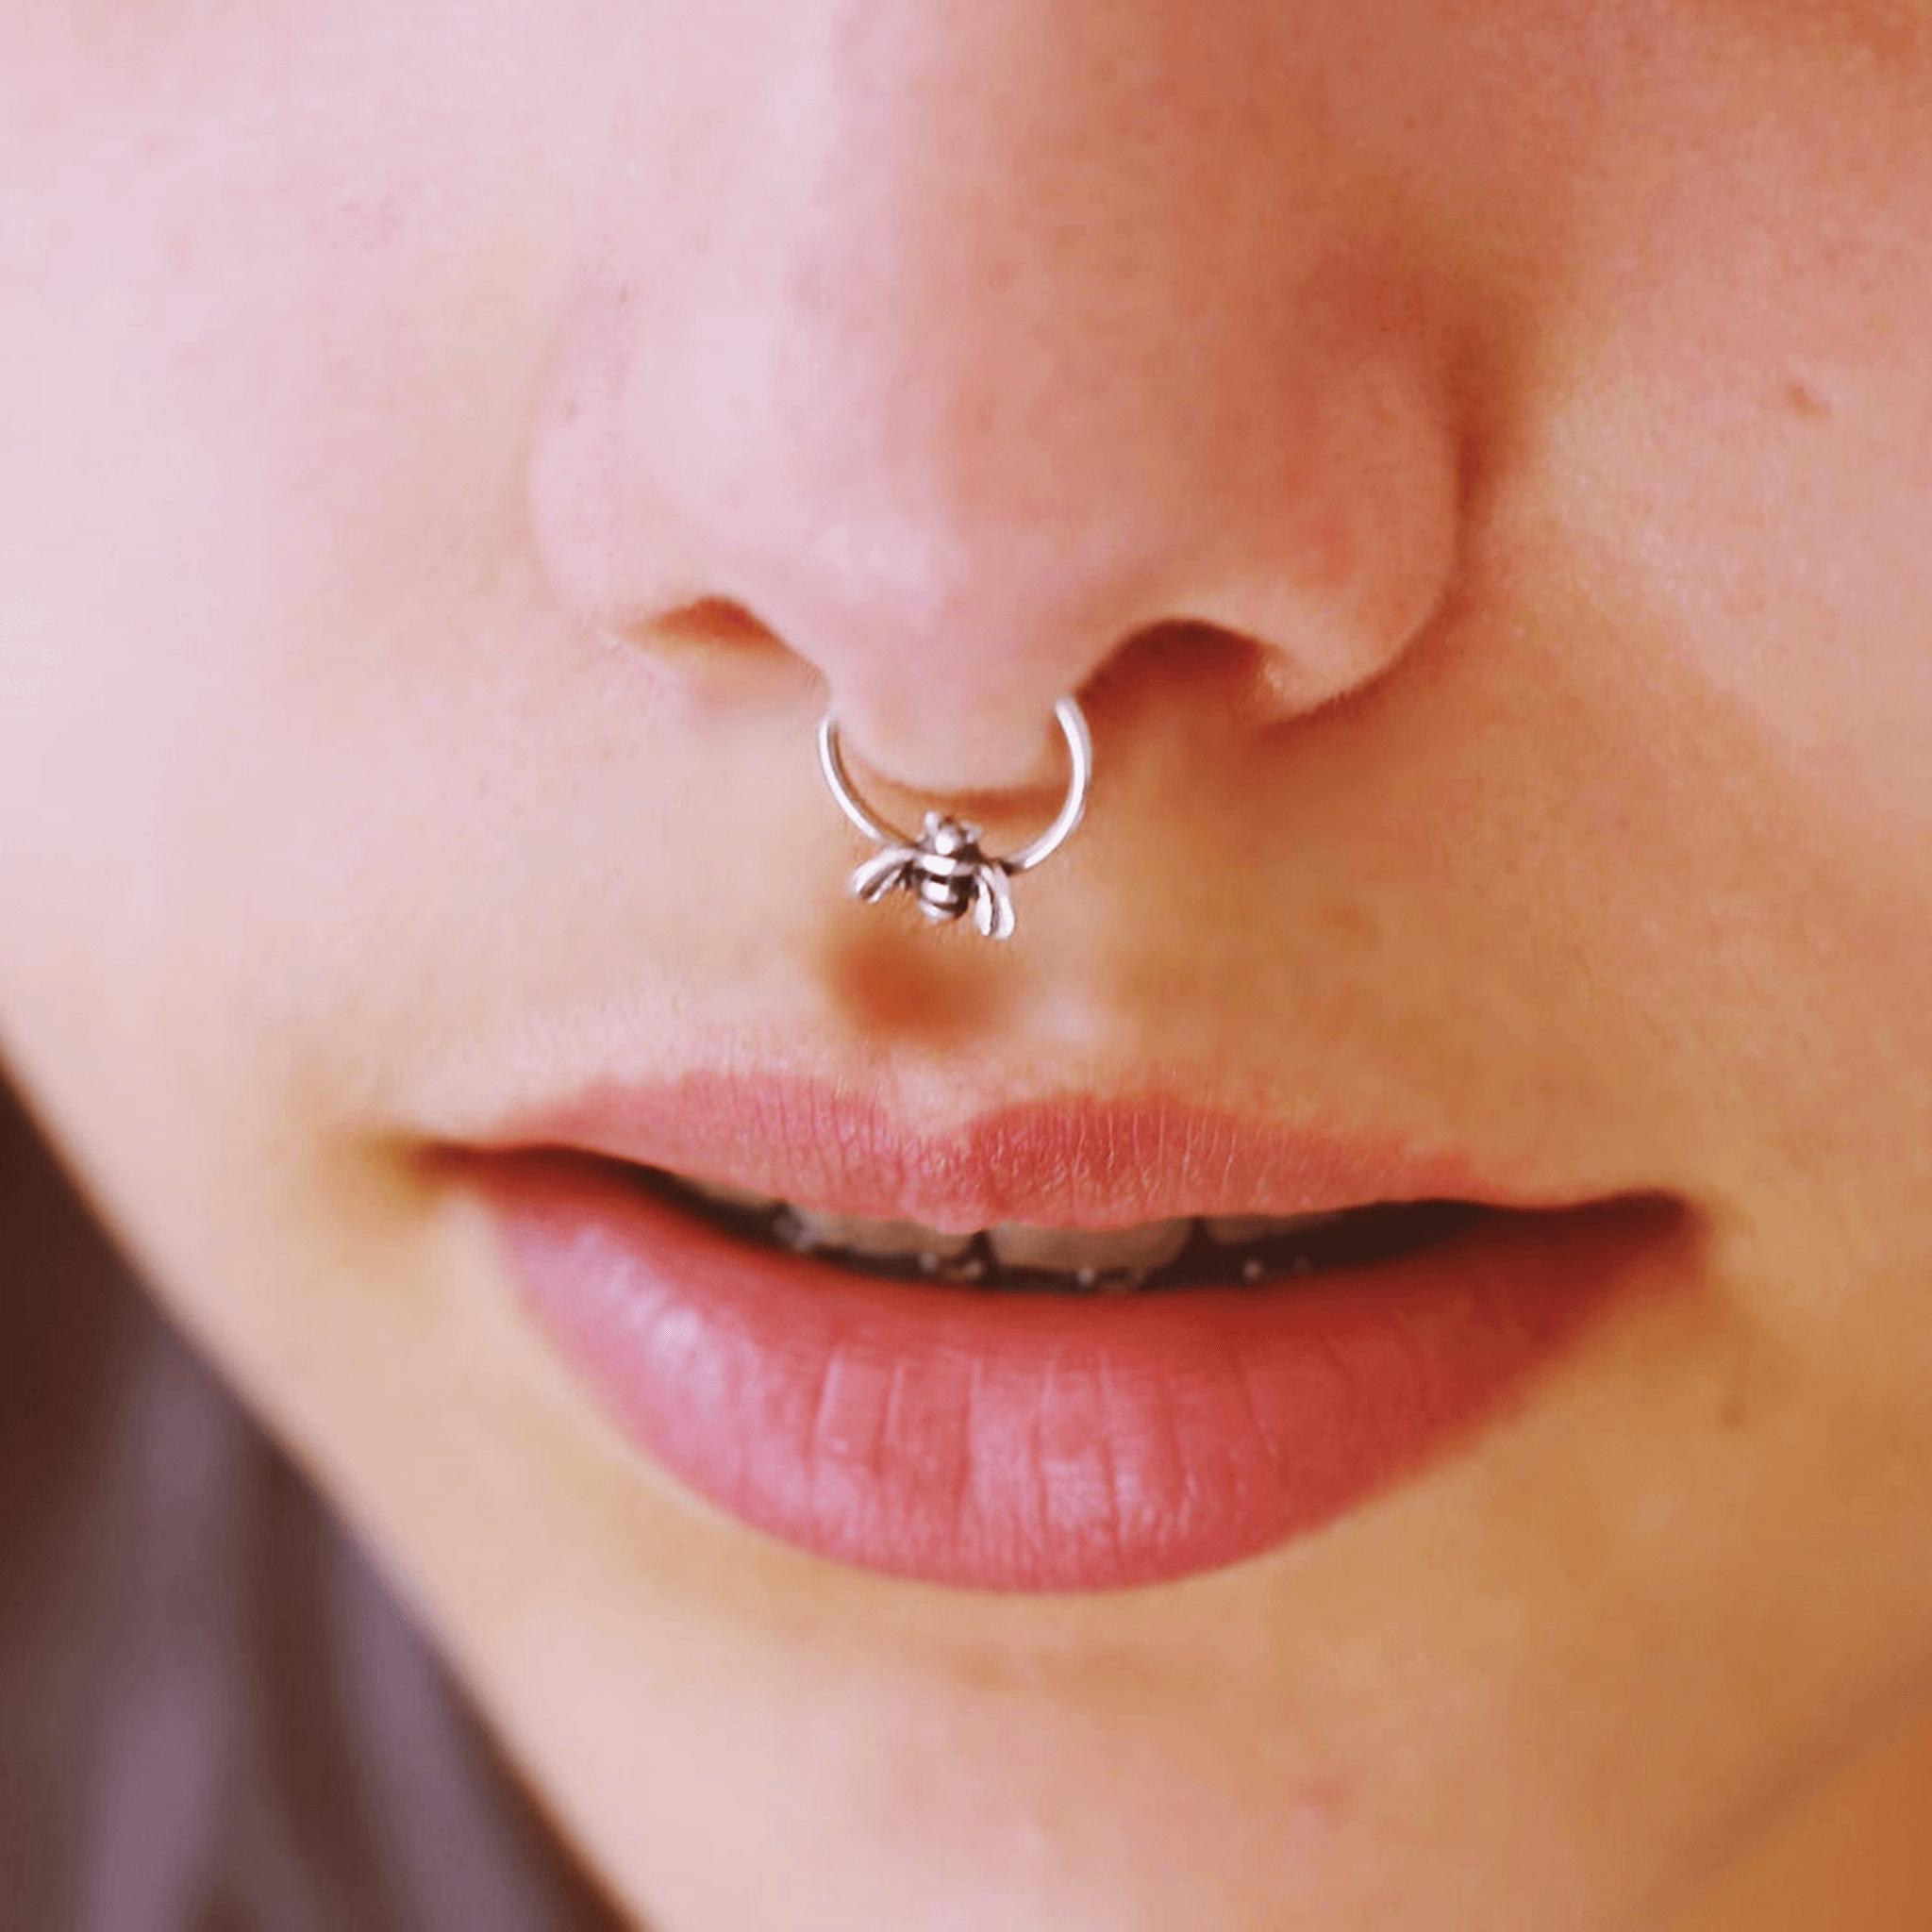 Bee Septum Faux Nose Ring - TinyBox Jewelry